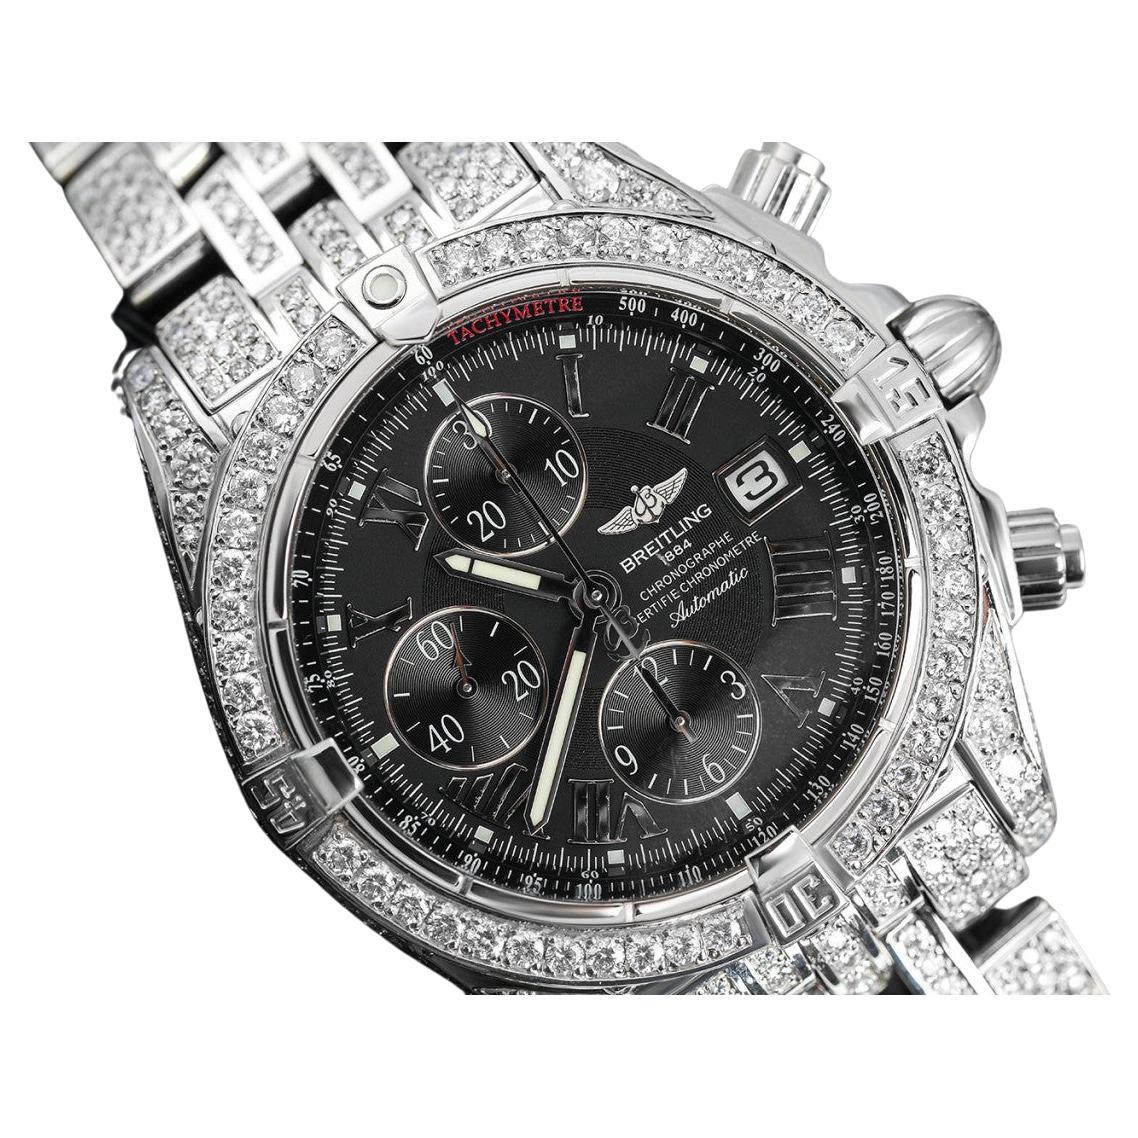 Does Breitling use real diamonds?